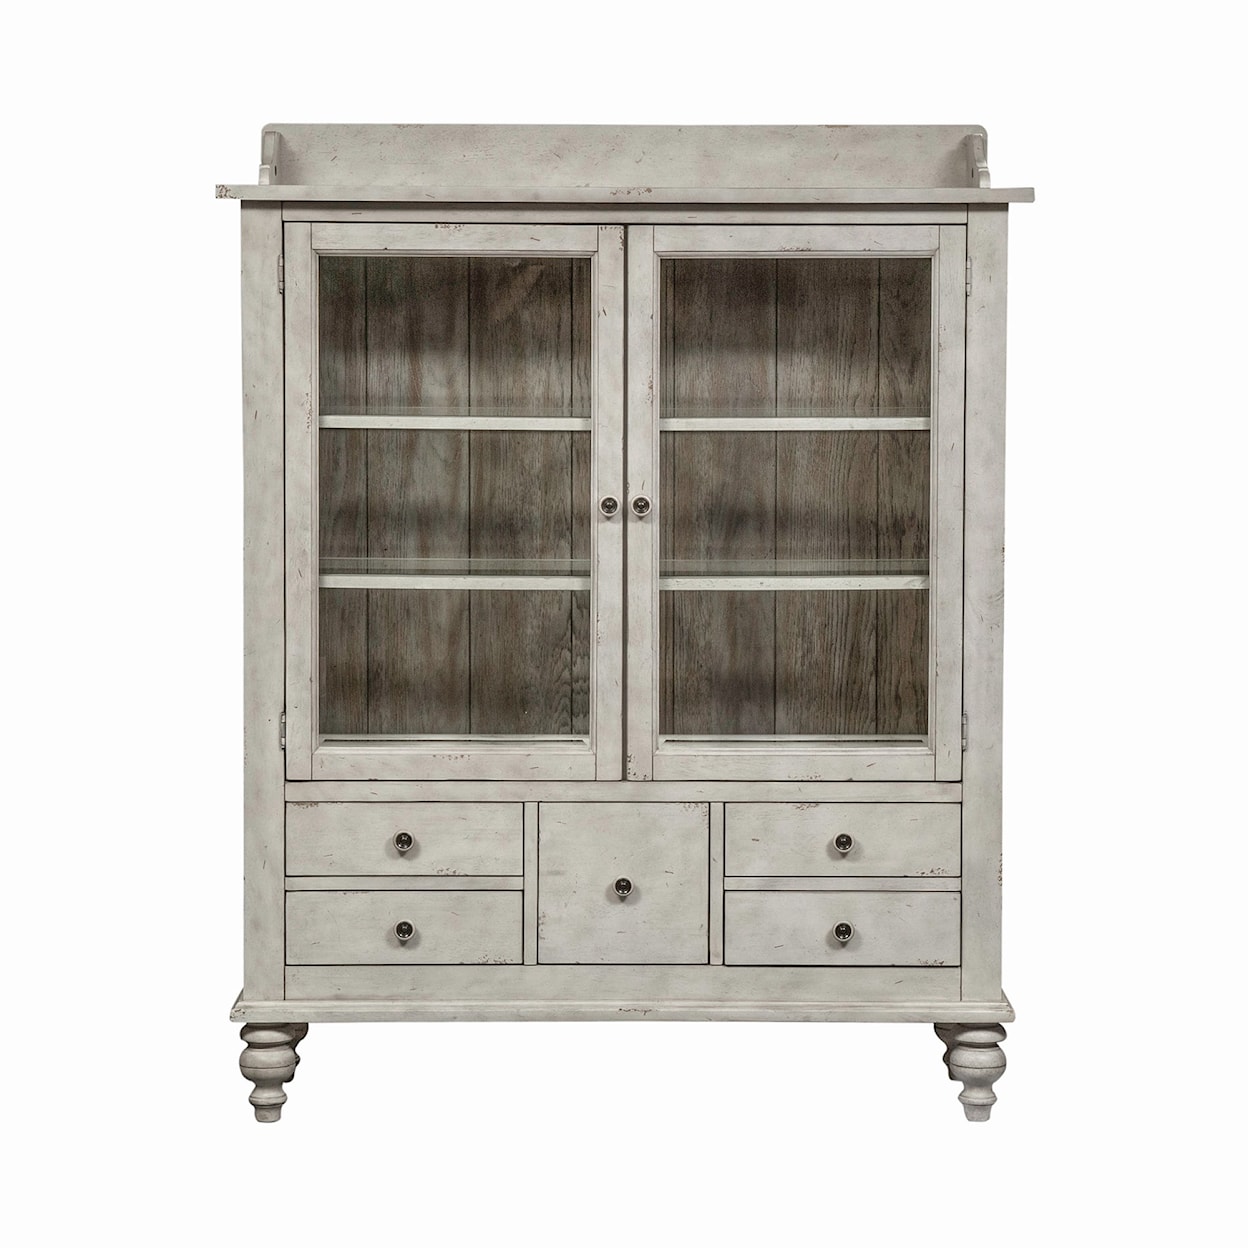 Libby Whitney Display Cabinet